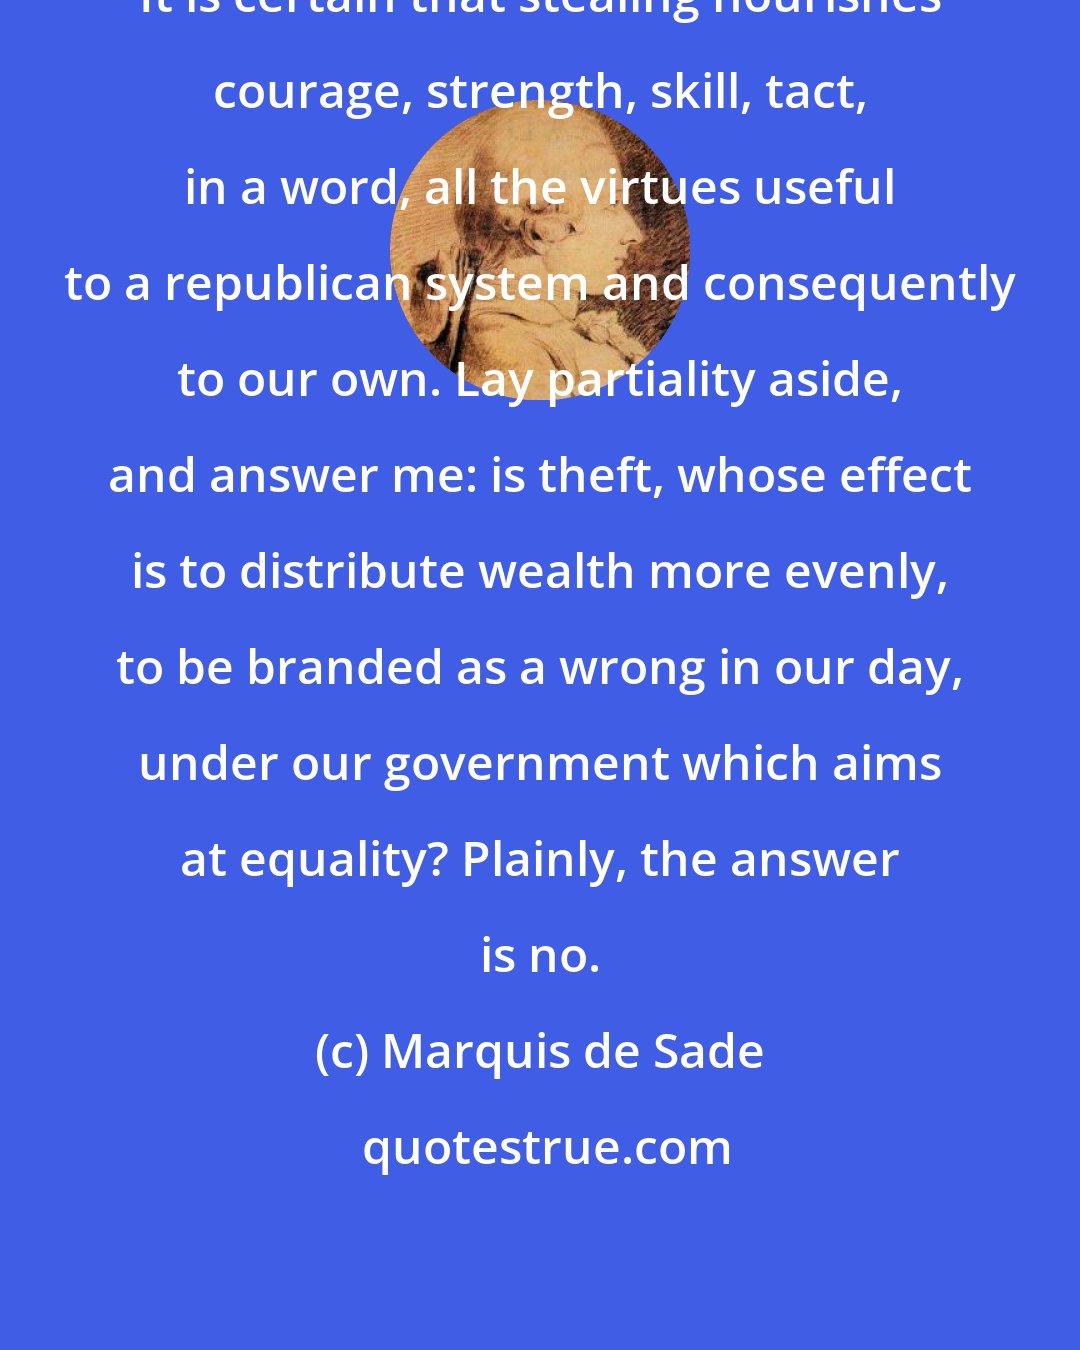 Marquis de Sade: It is certain that stealing nourishes courage, strength, skill, tact, in a word, all the virtues useful to a republican system and consequently to our own. Lay partiality aside, and answer me: is theft, whose effect is to distribute wealth more evenly, to be branded as a wrong in our day, under our government which aims at equality? Plainly, the answer is no.